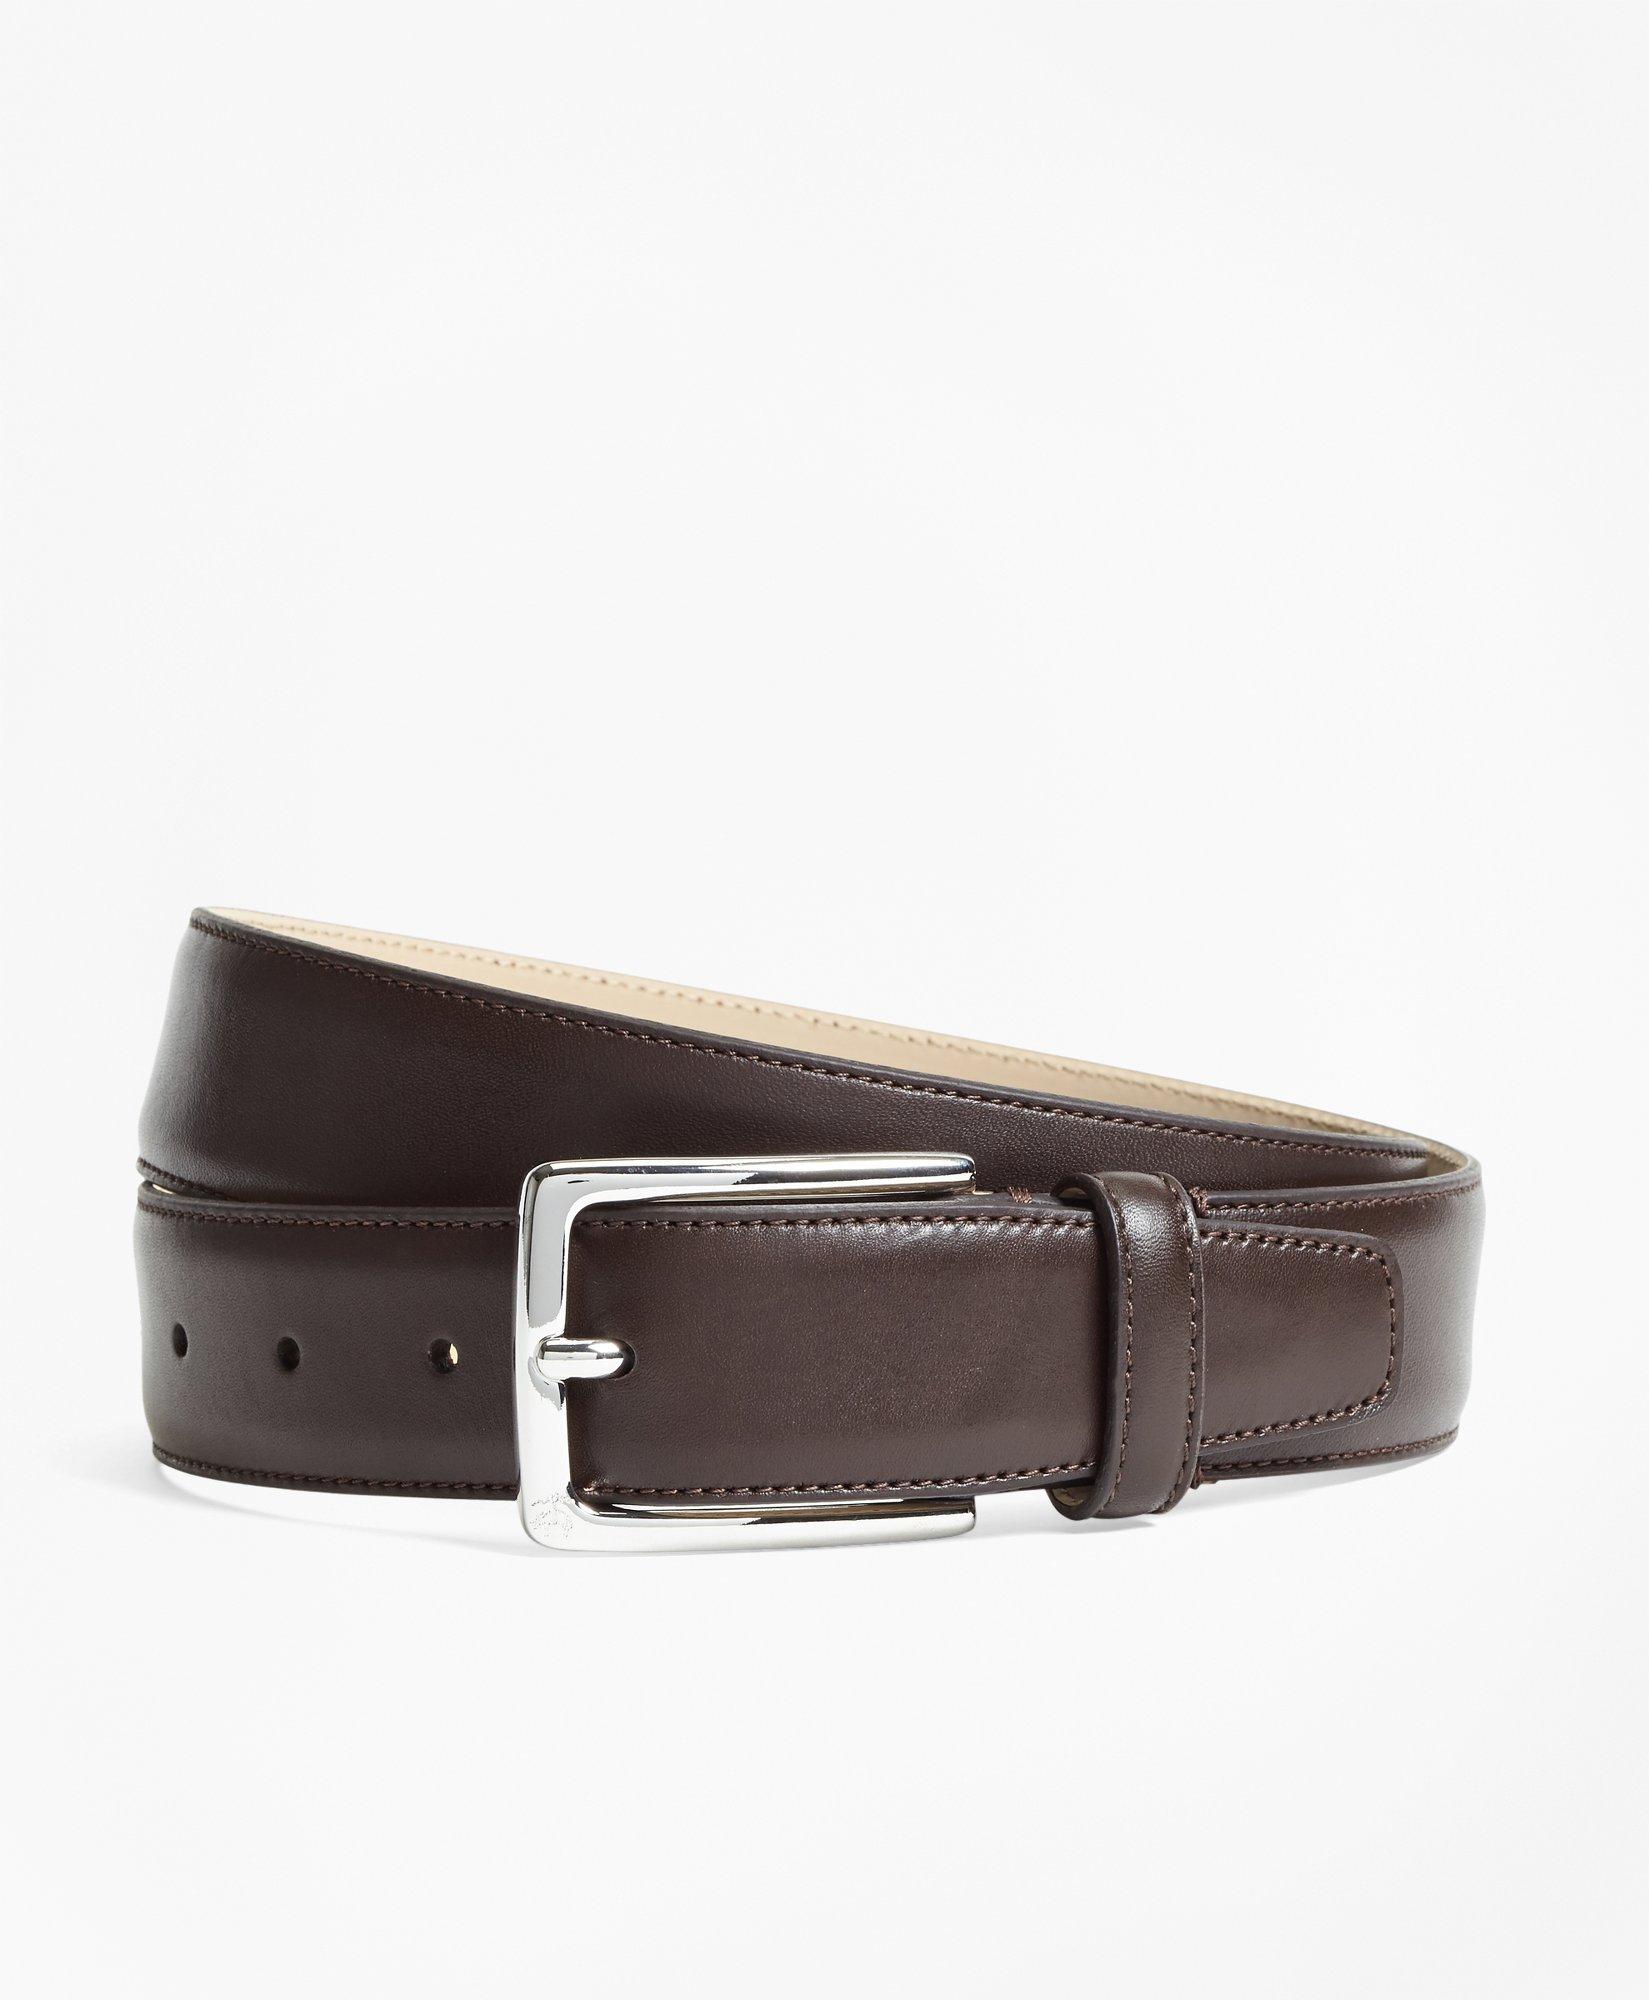 Brooks Brothers Men's Braided Cotton Leather Tab Belt